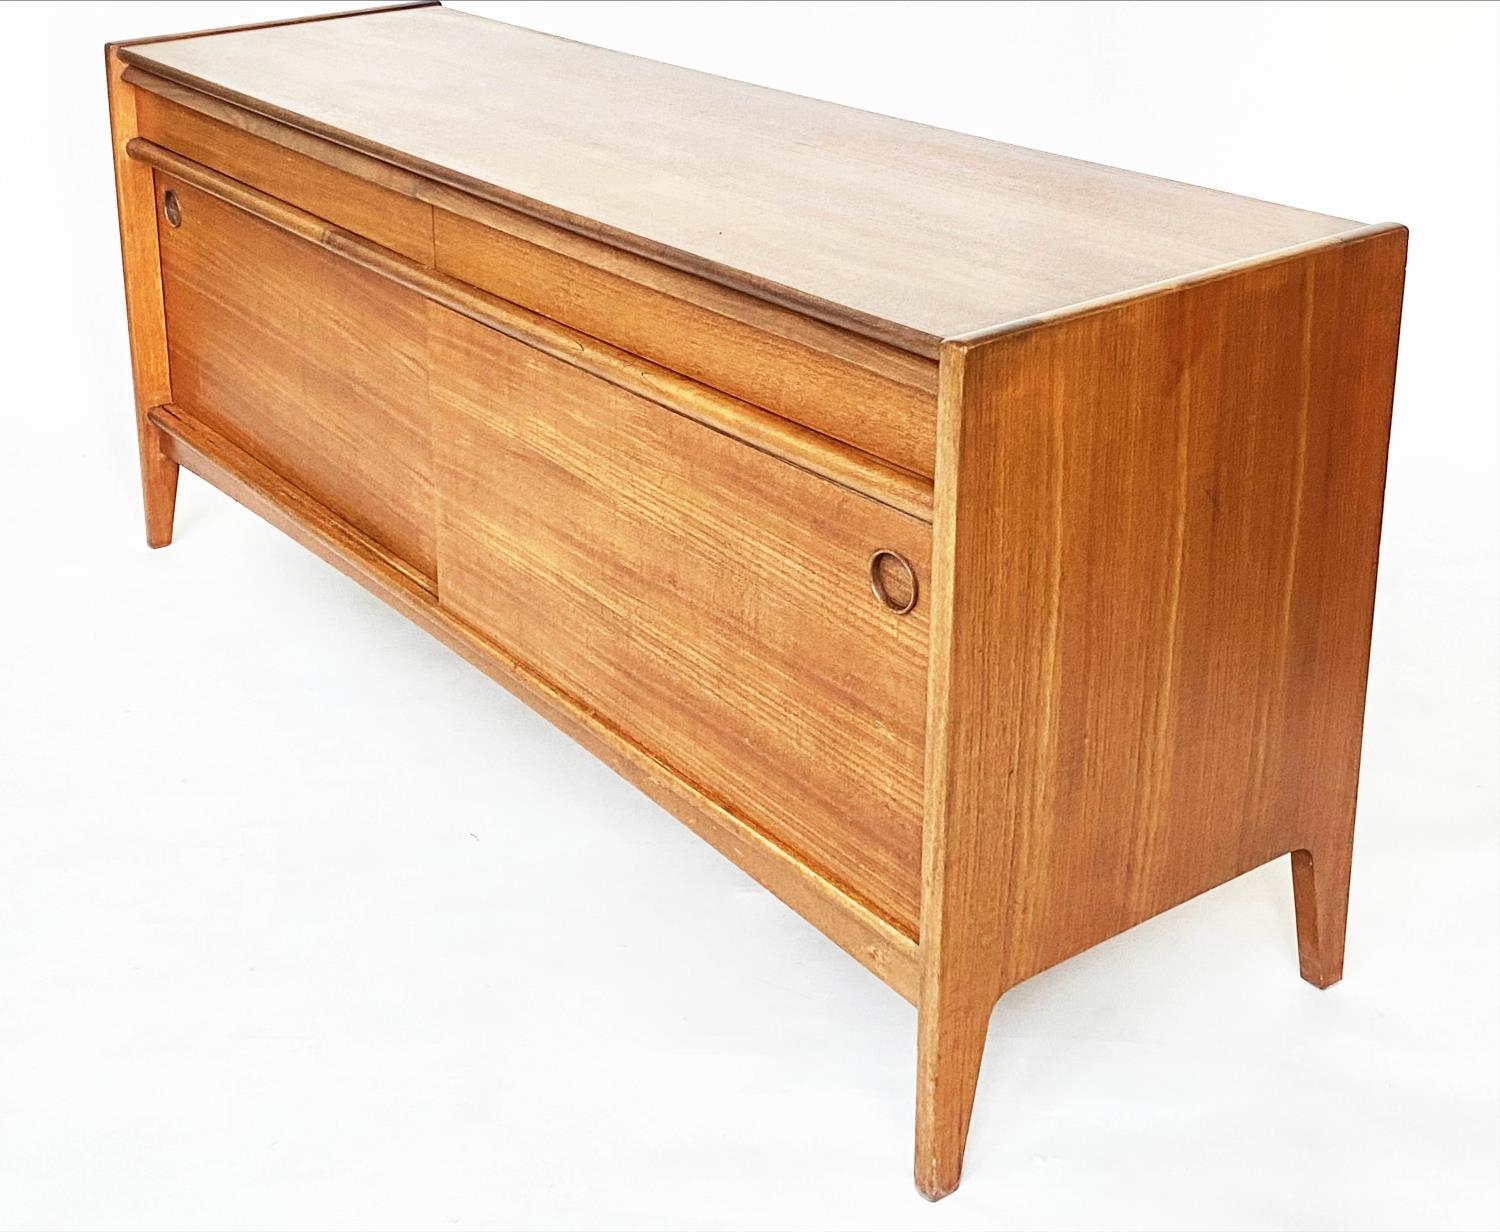 SIDEBOARD, 1960s Danish teak with two drawers and two sliding doors, 160cm W x 47cm D x 74cm H. - Image 2 of 5